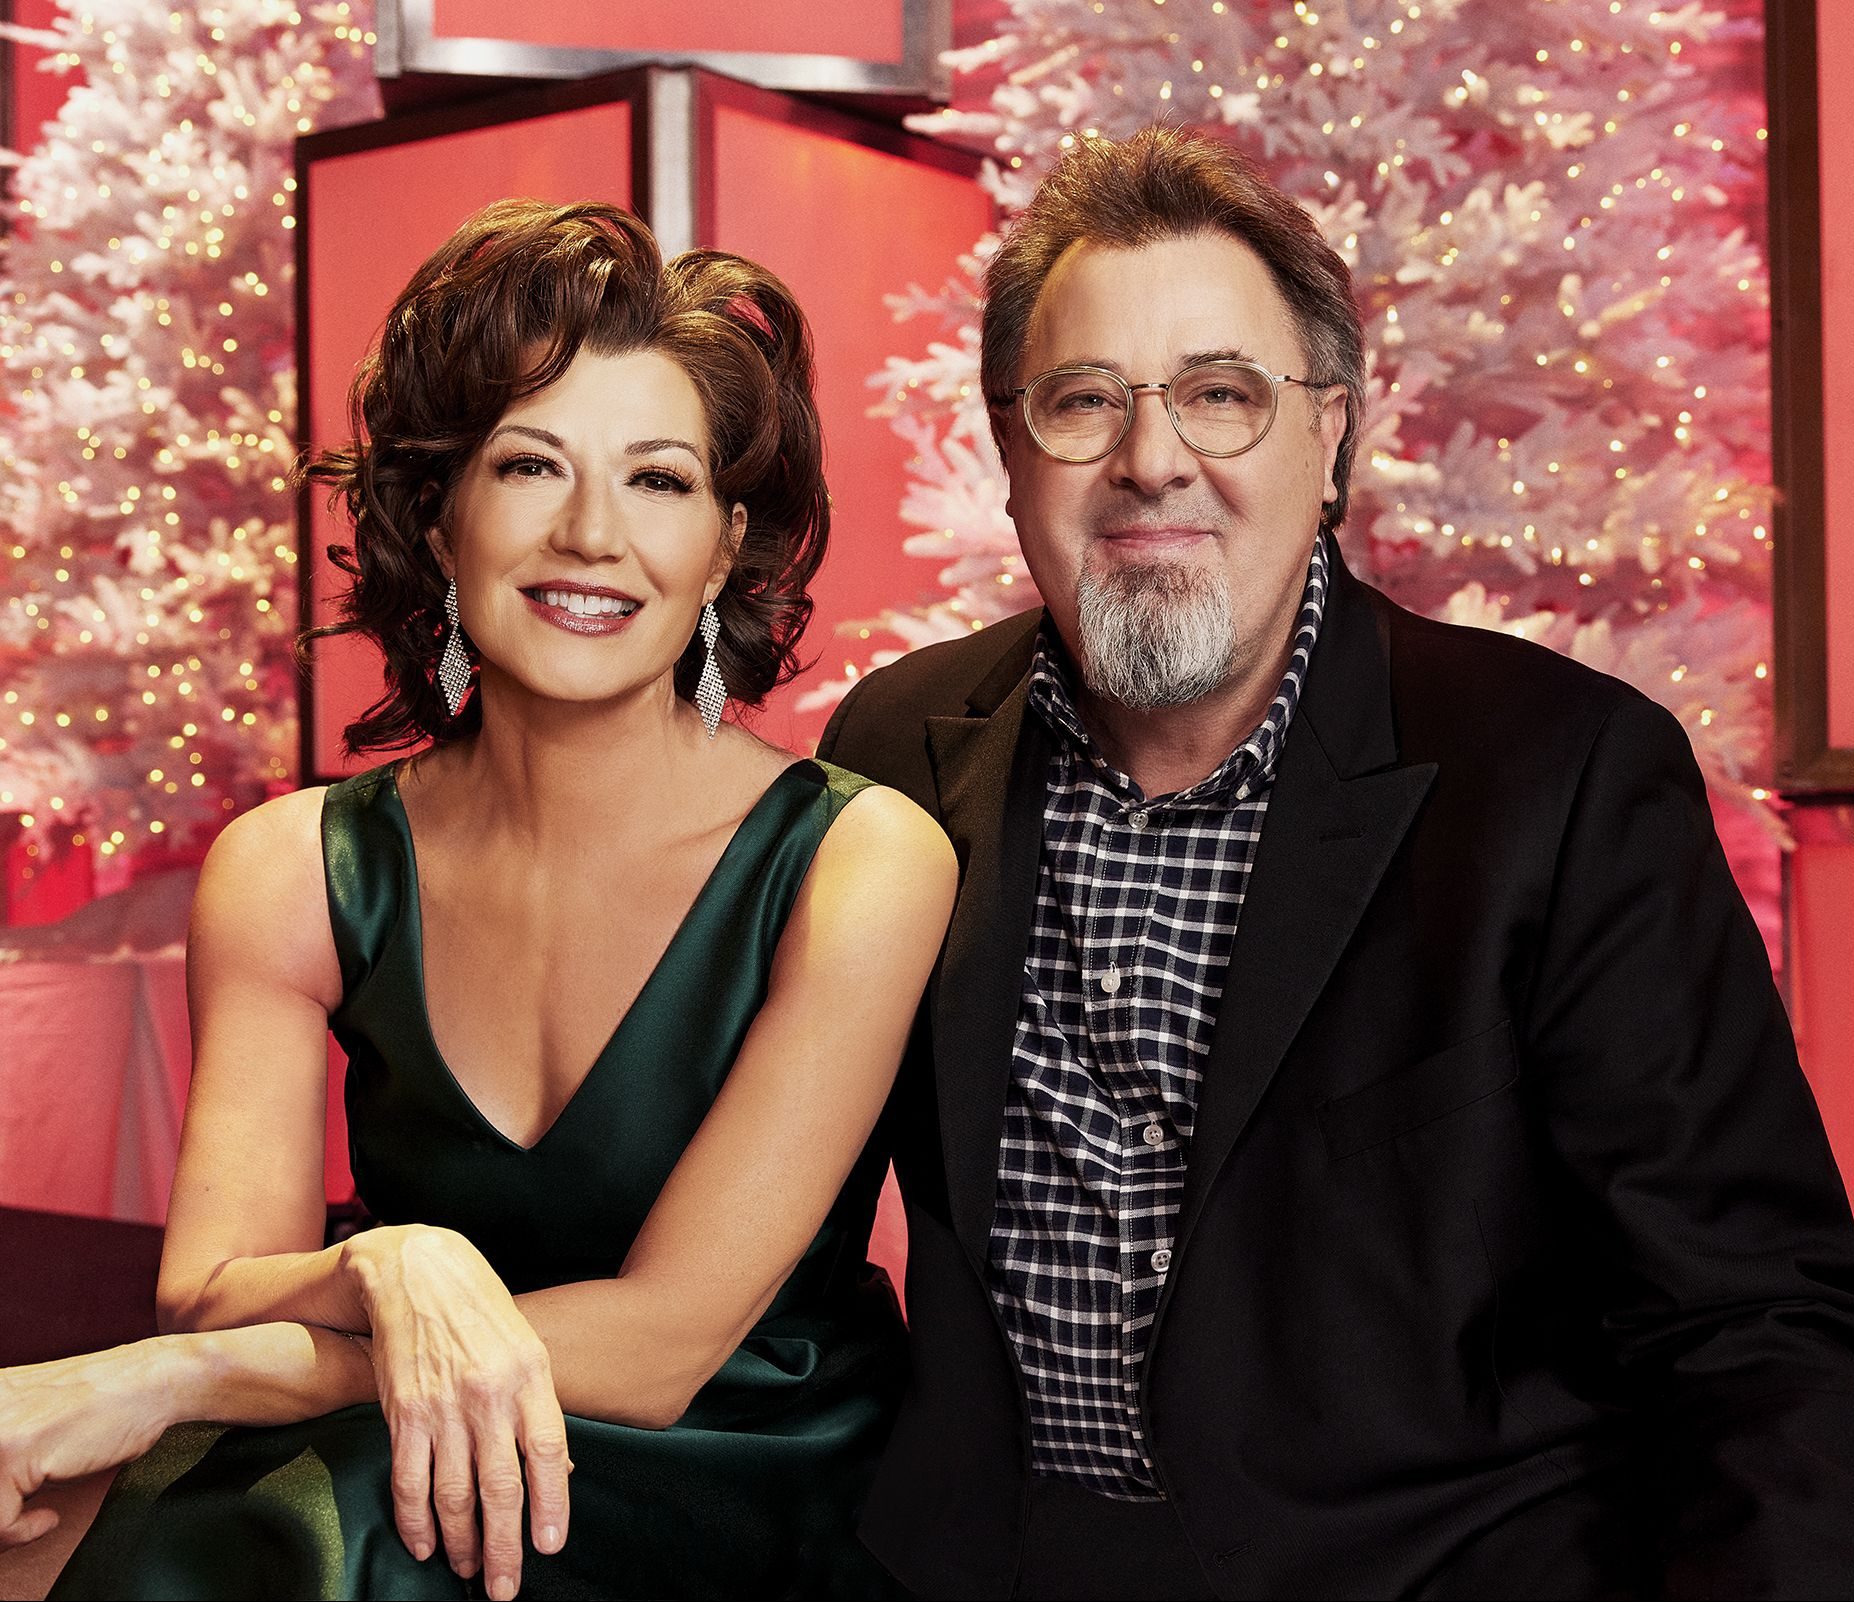 Amy Grant and Vince Gill to Release New Christmas Album on September 13 | Pre-Order Now